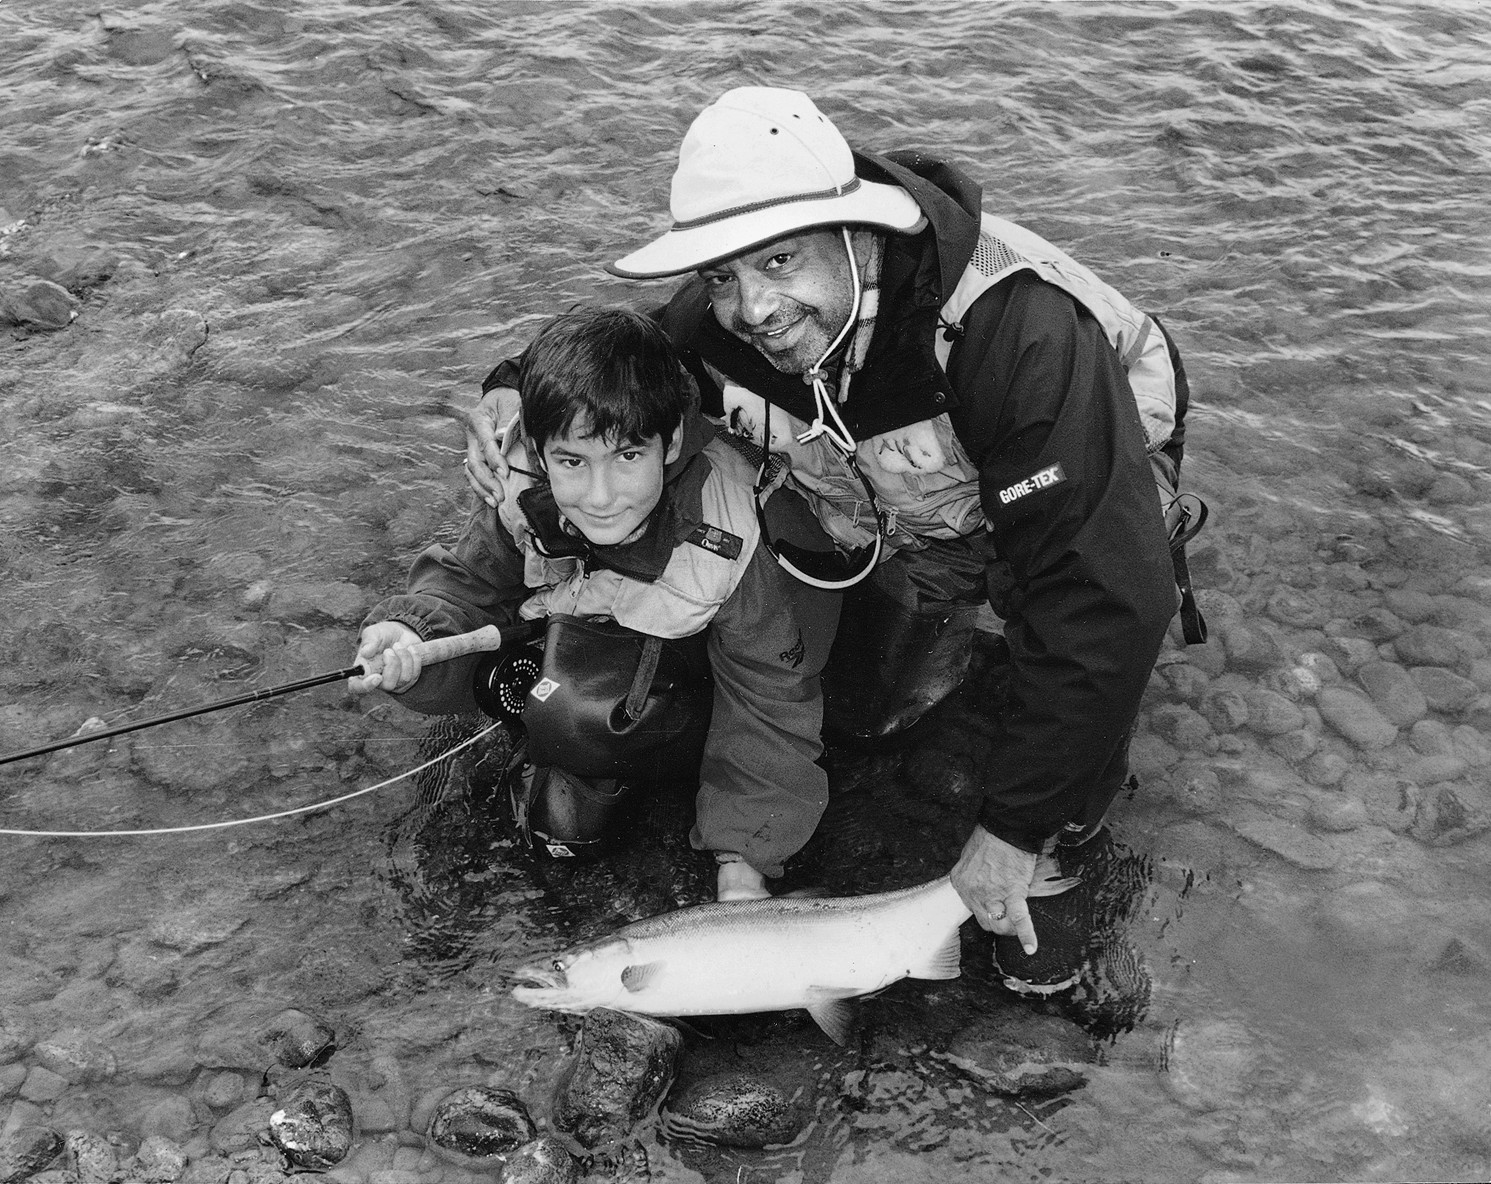 Cheech Marin, right, fishing for sockeye salmon in Alaska with his son Joey, in an undated family photo.